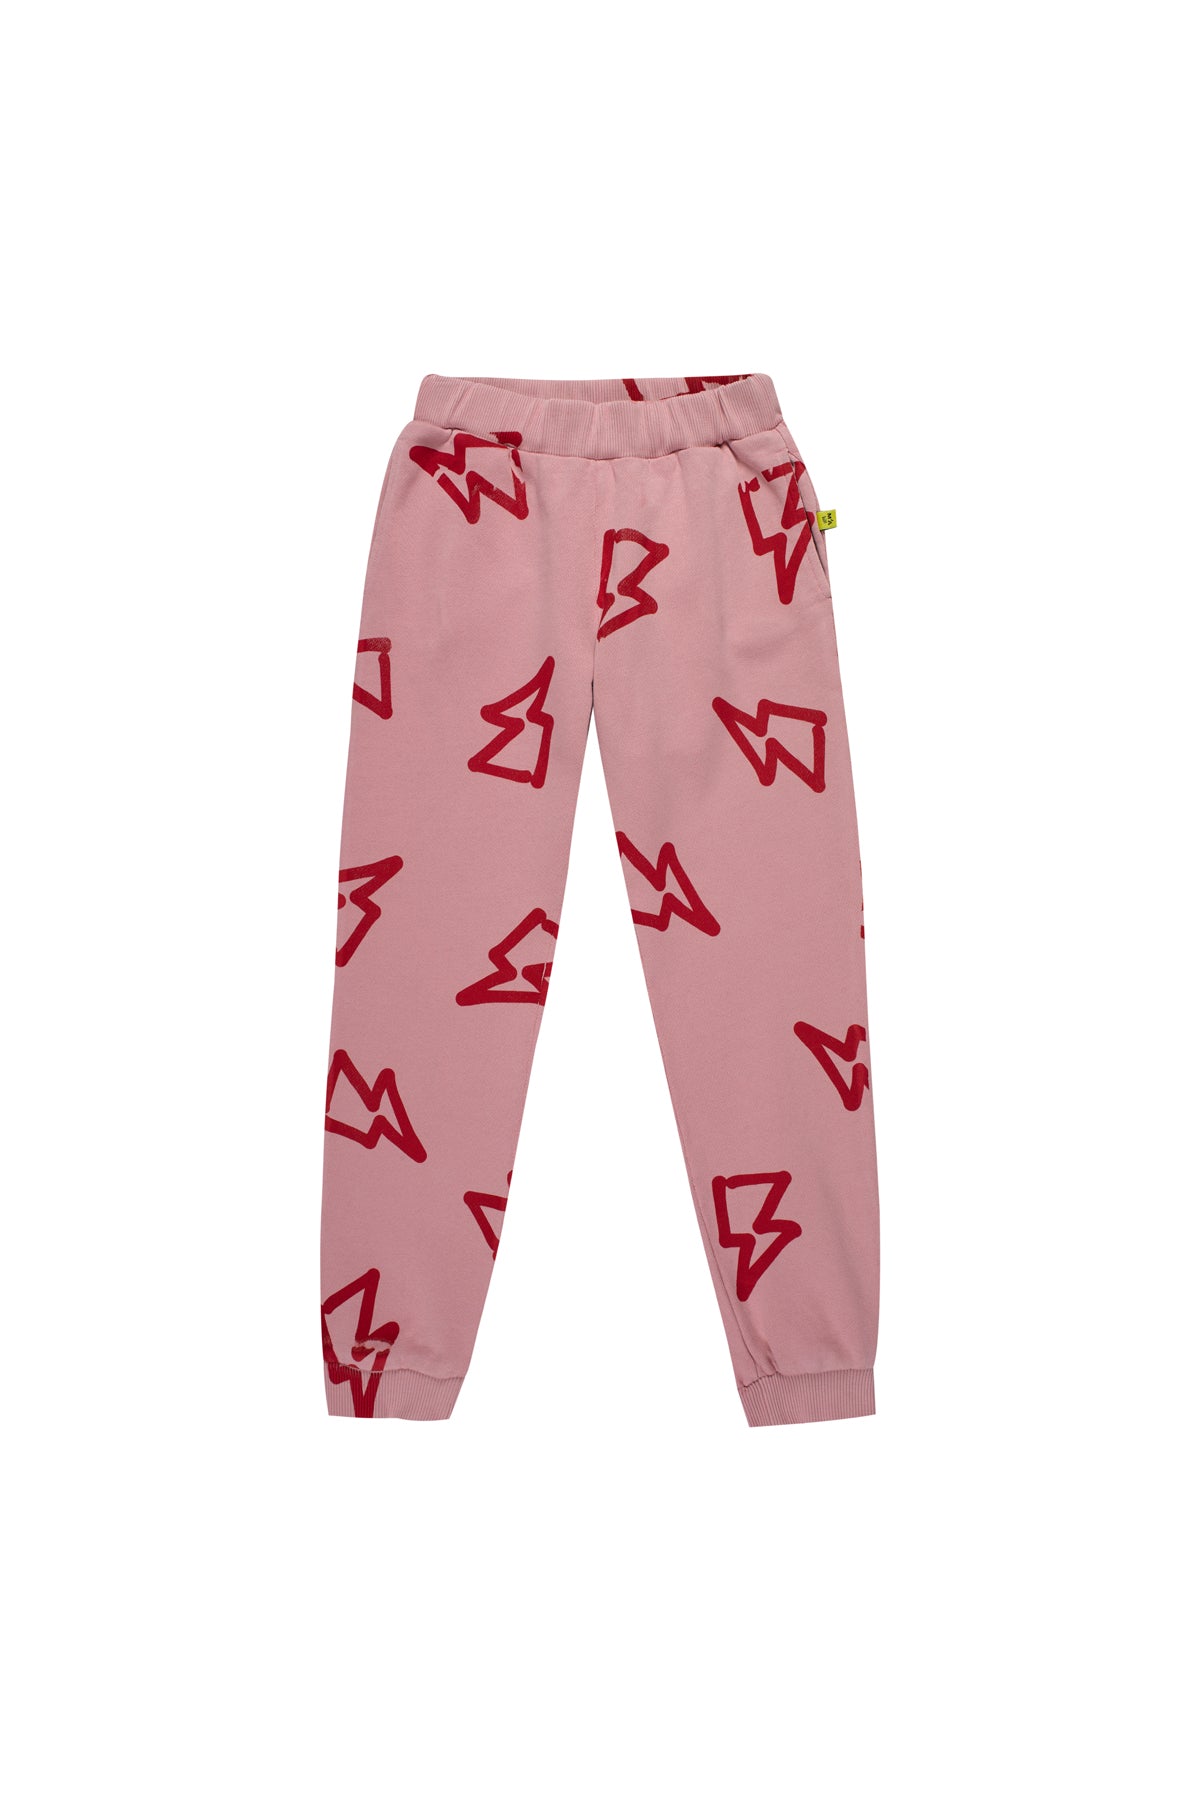 THUNDER PRINT TRACKSUIT TROUSERS makids